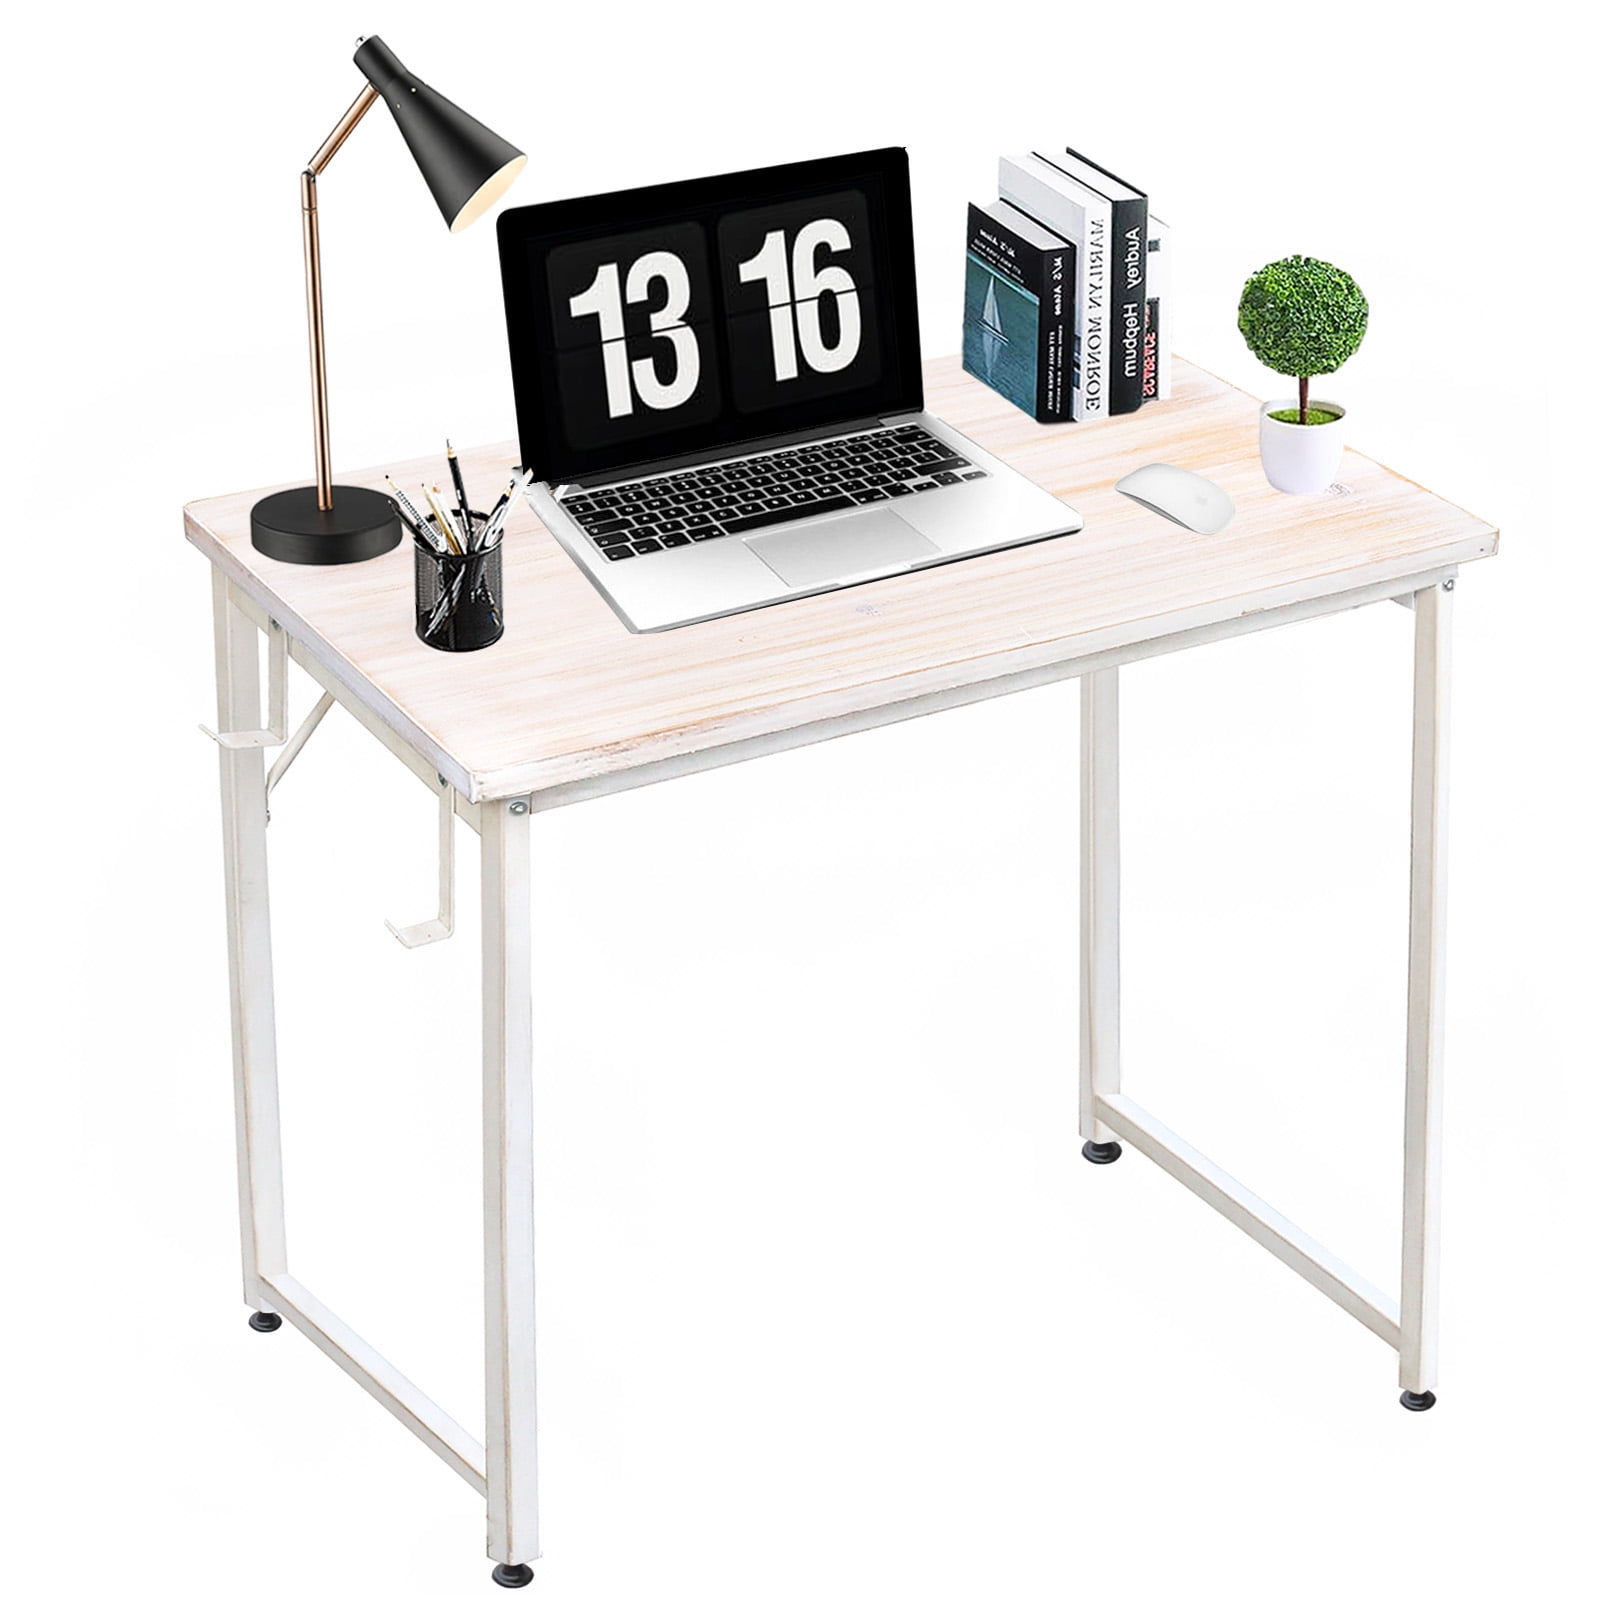 Details about   Rustic industrial style desk with Hairpin Legs office study Solid Wood Timber 